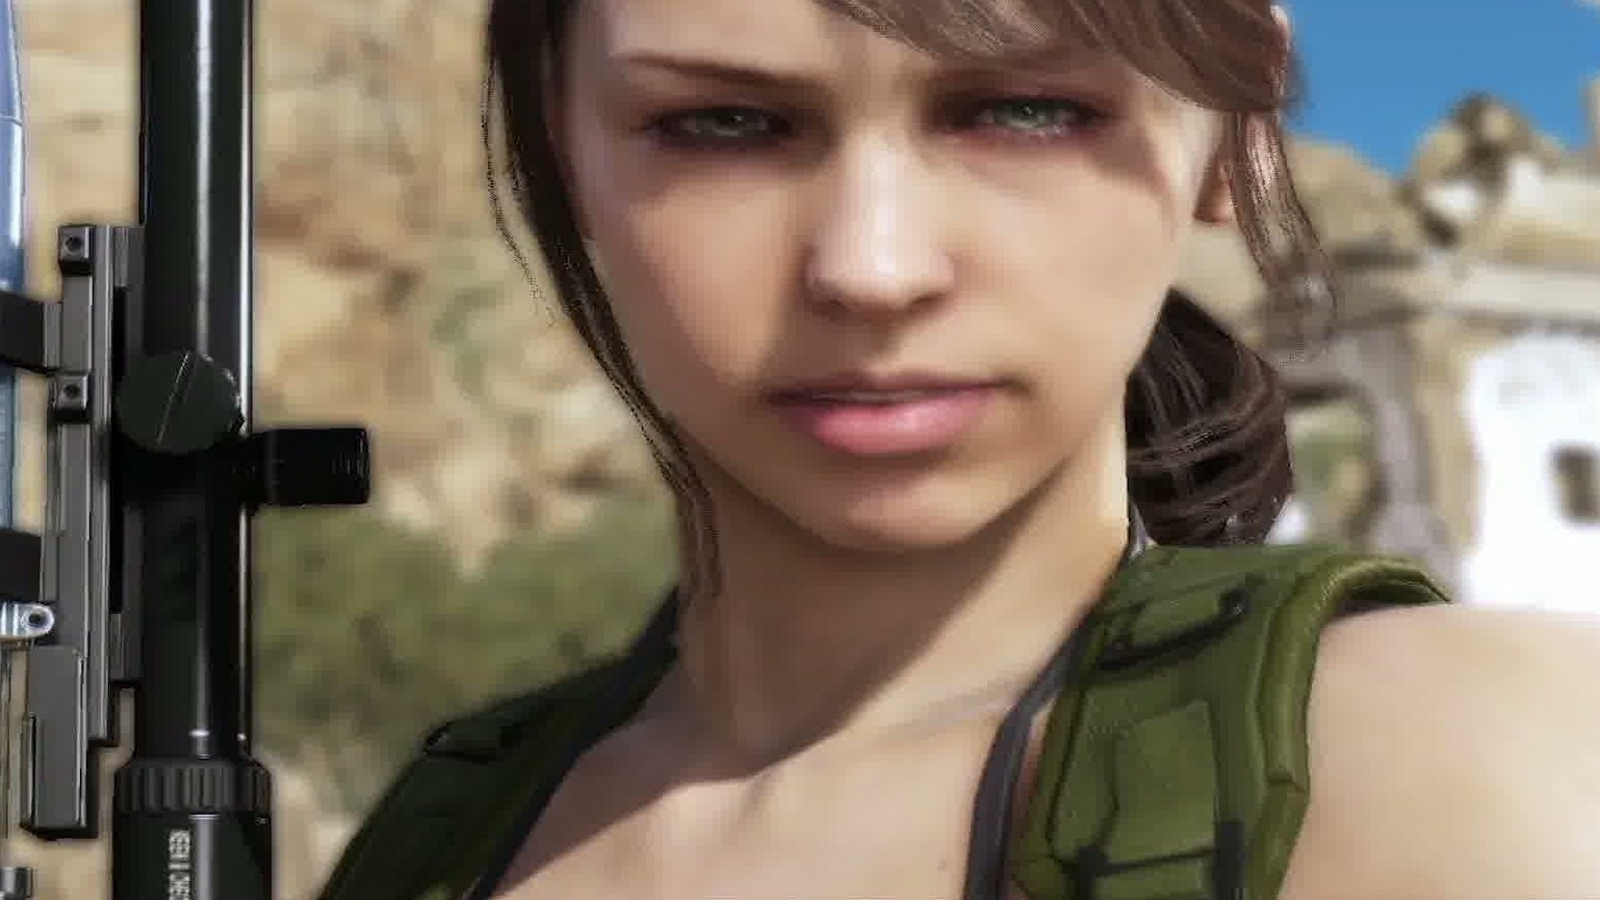 Metal Gear Solid 5: The Phantom Pain Snake and Quiet gameplay